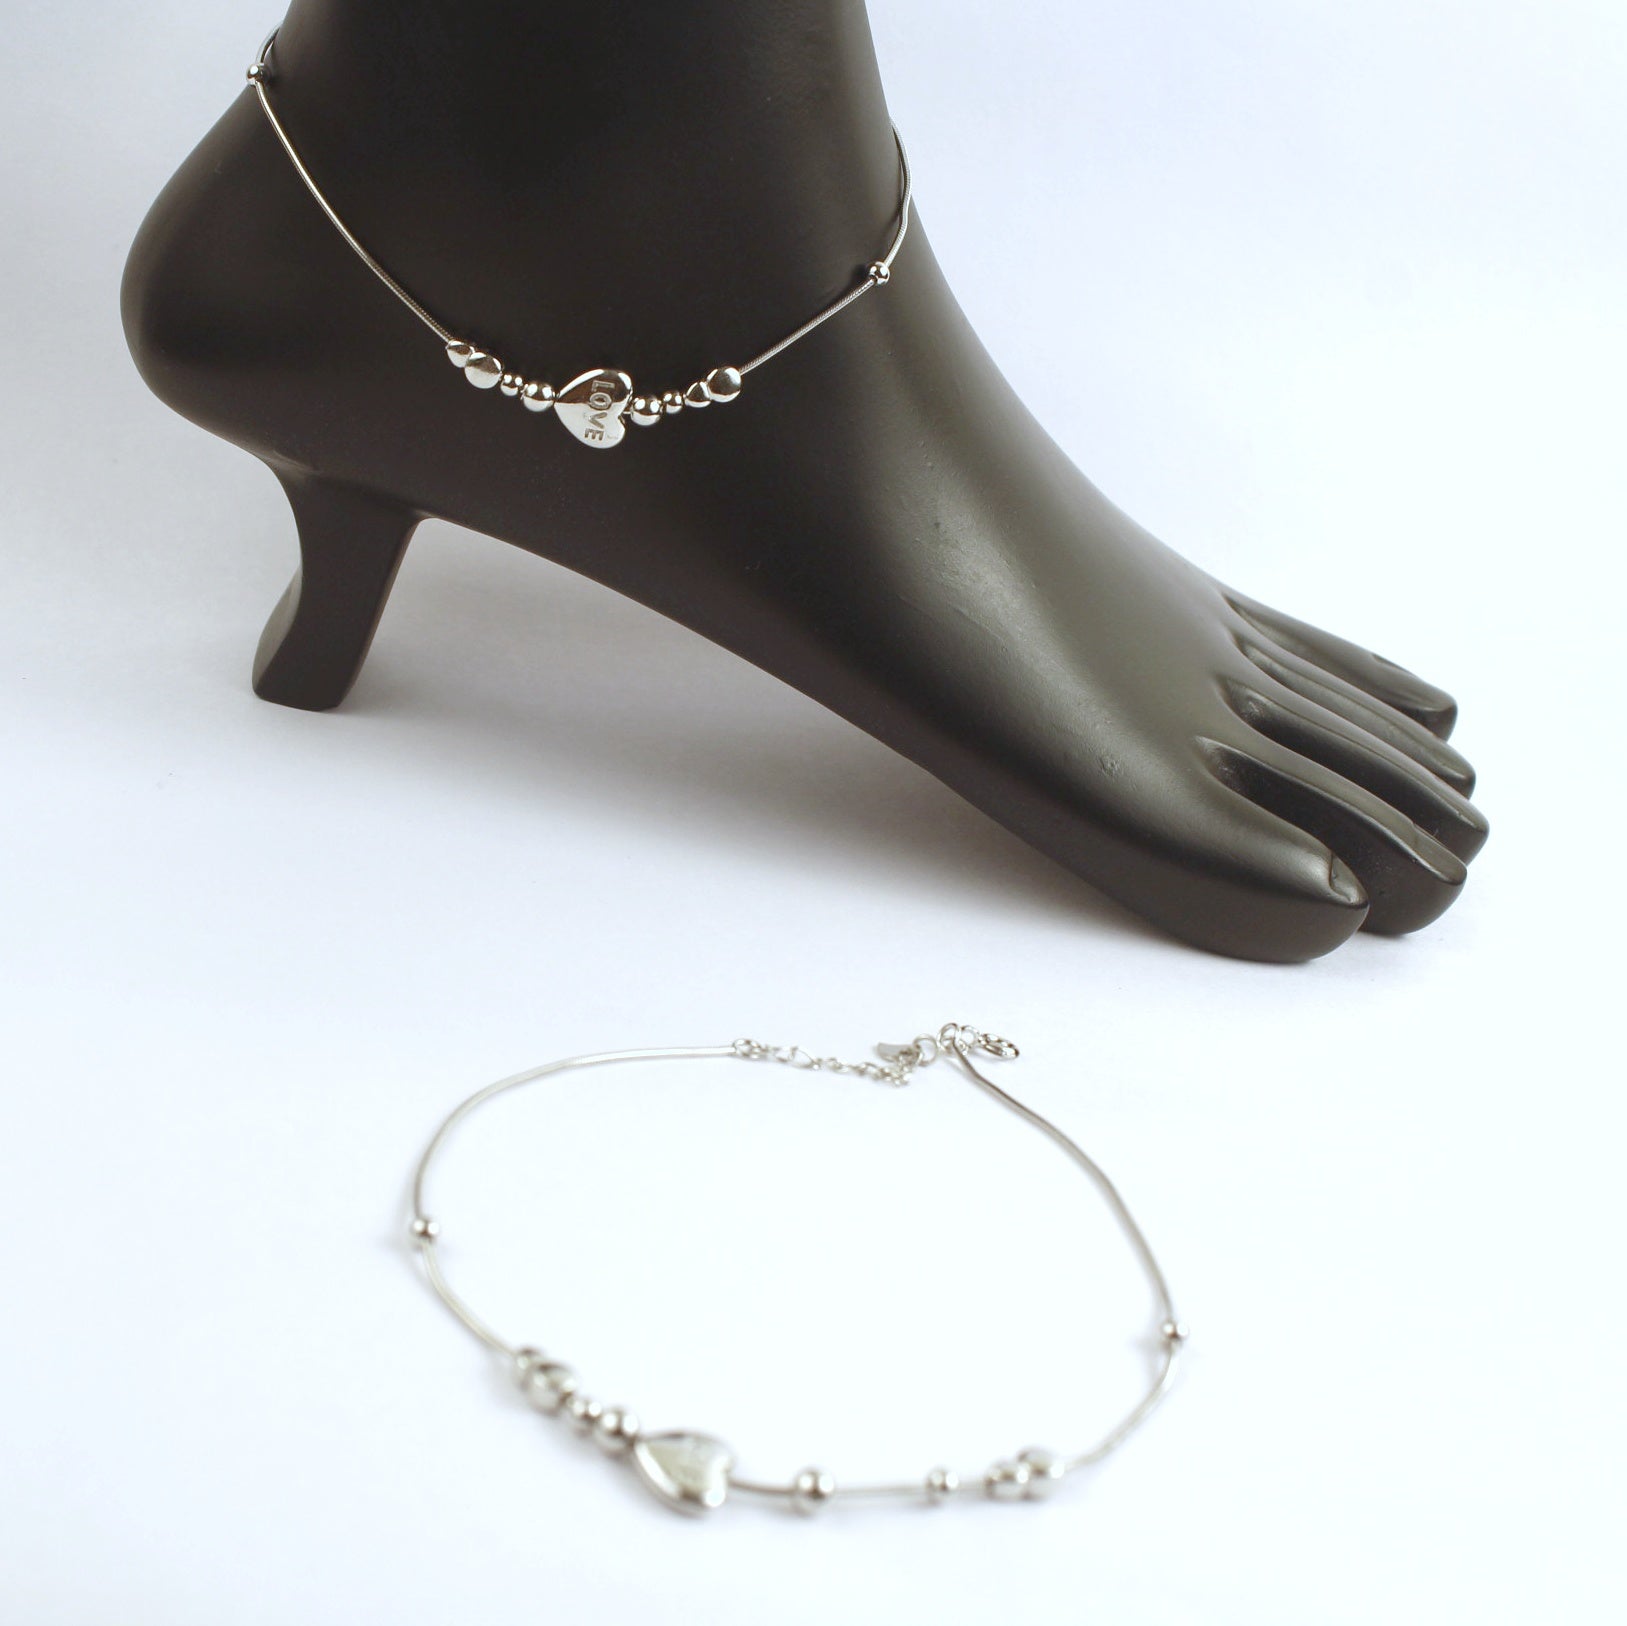 Pure Silver Love Heart Anklet - Silver Jewelery 925